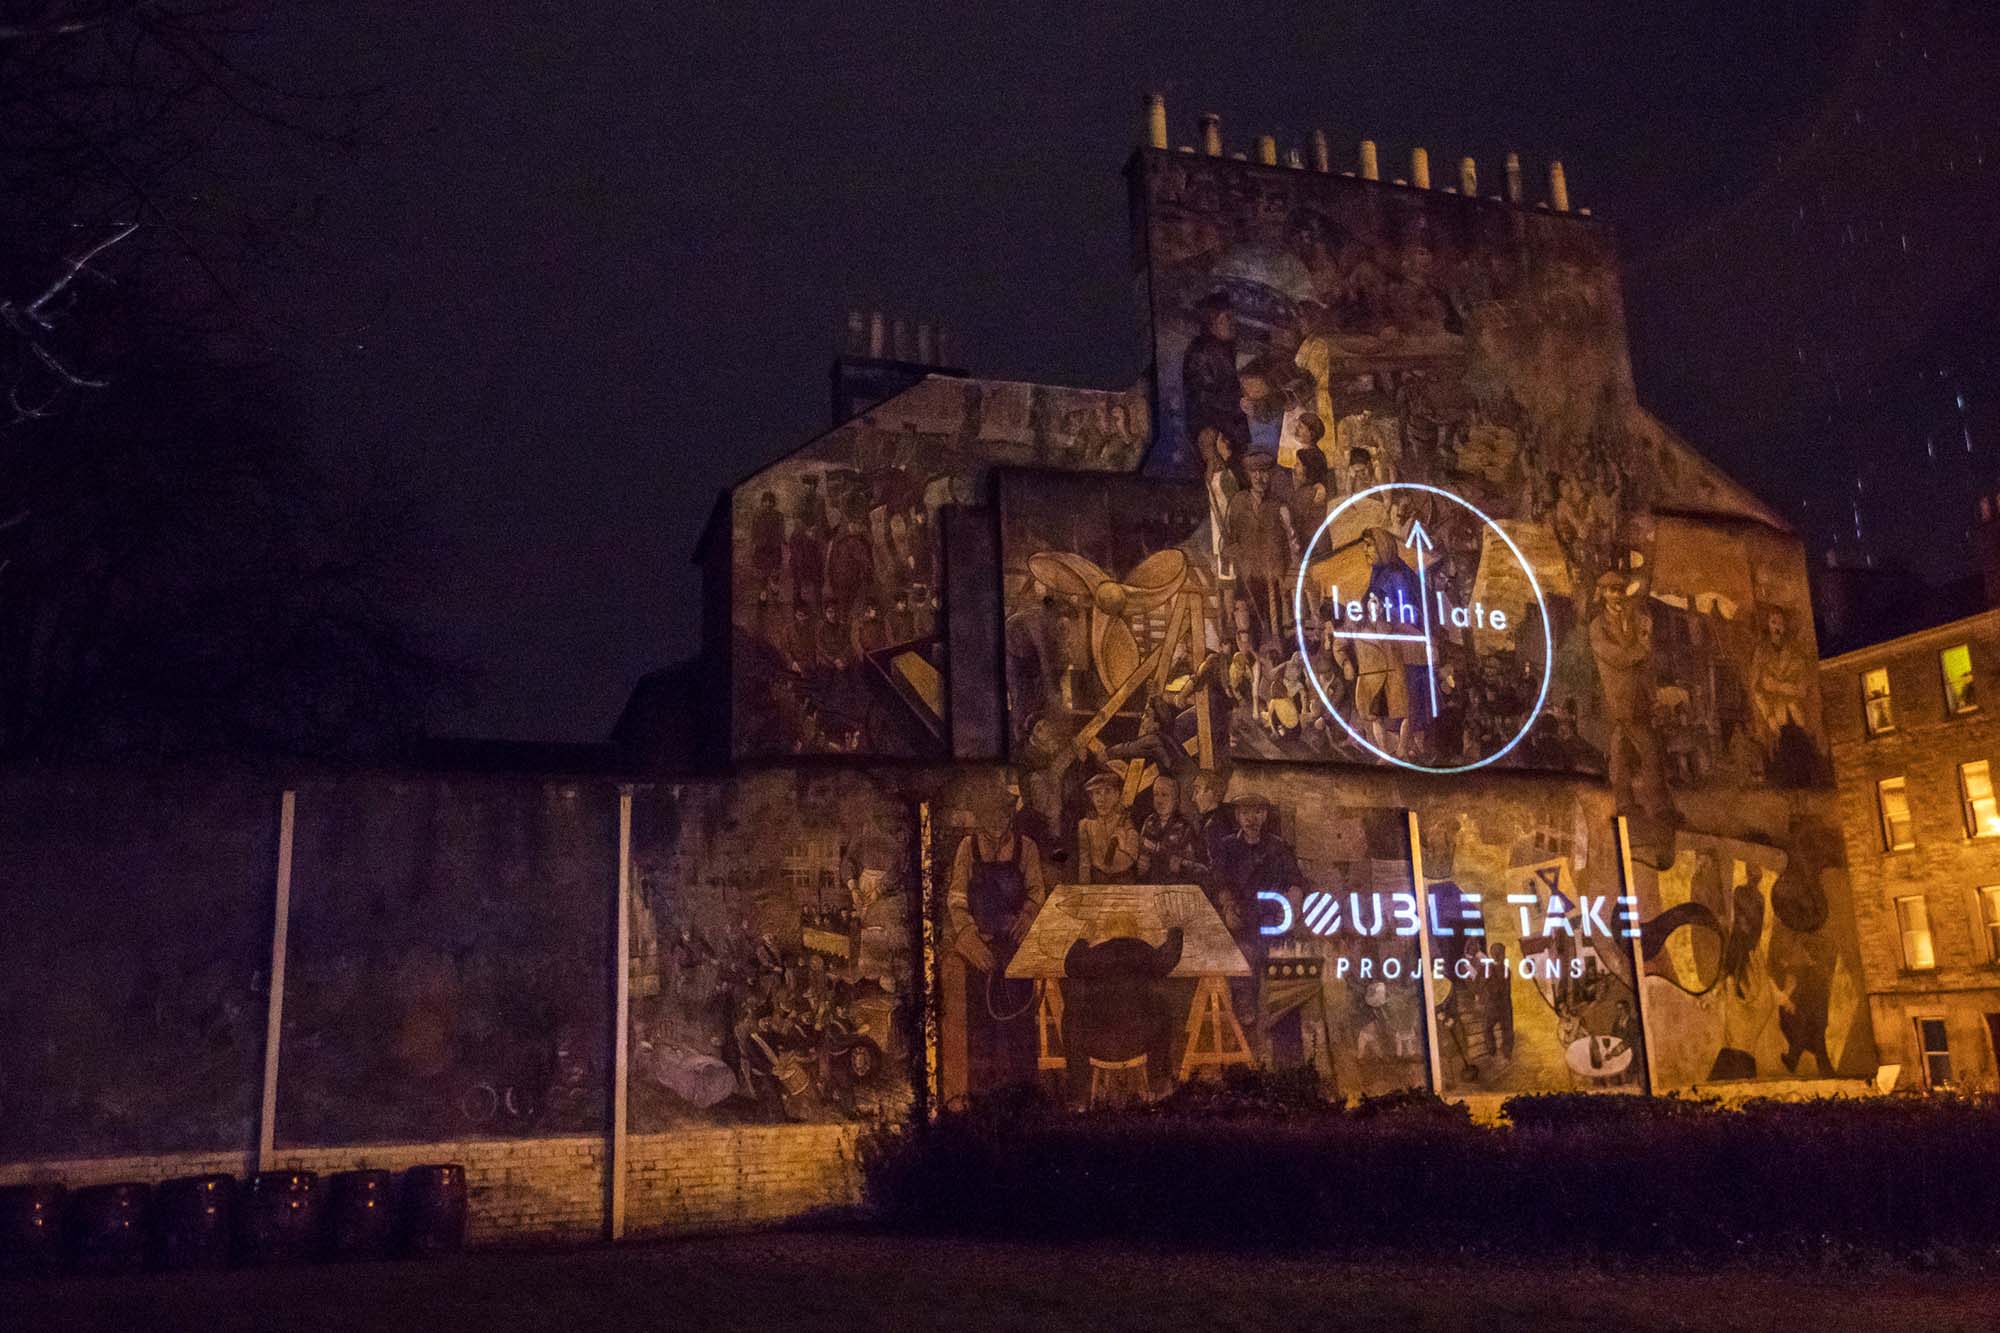 leith mural projections showing partners logos